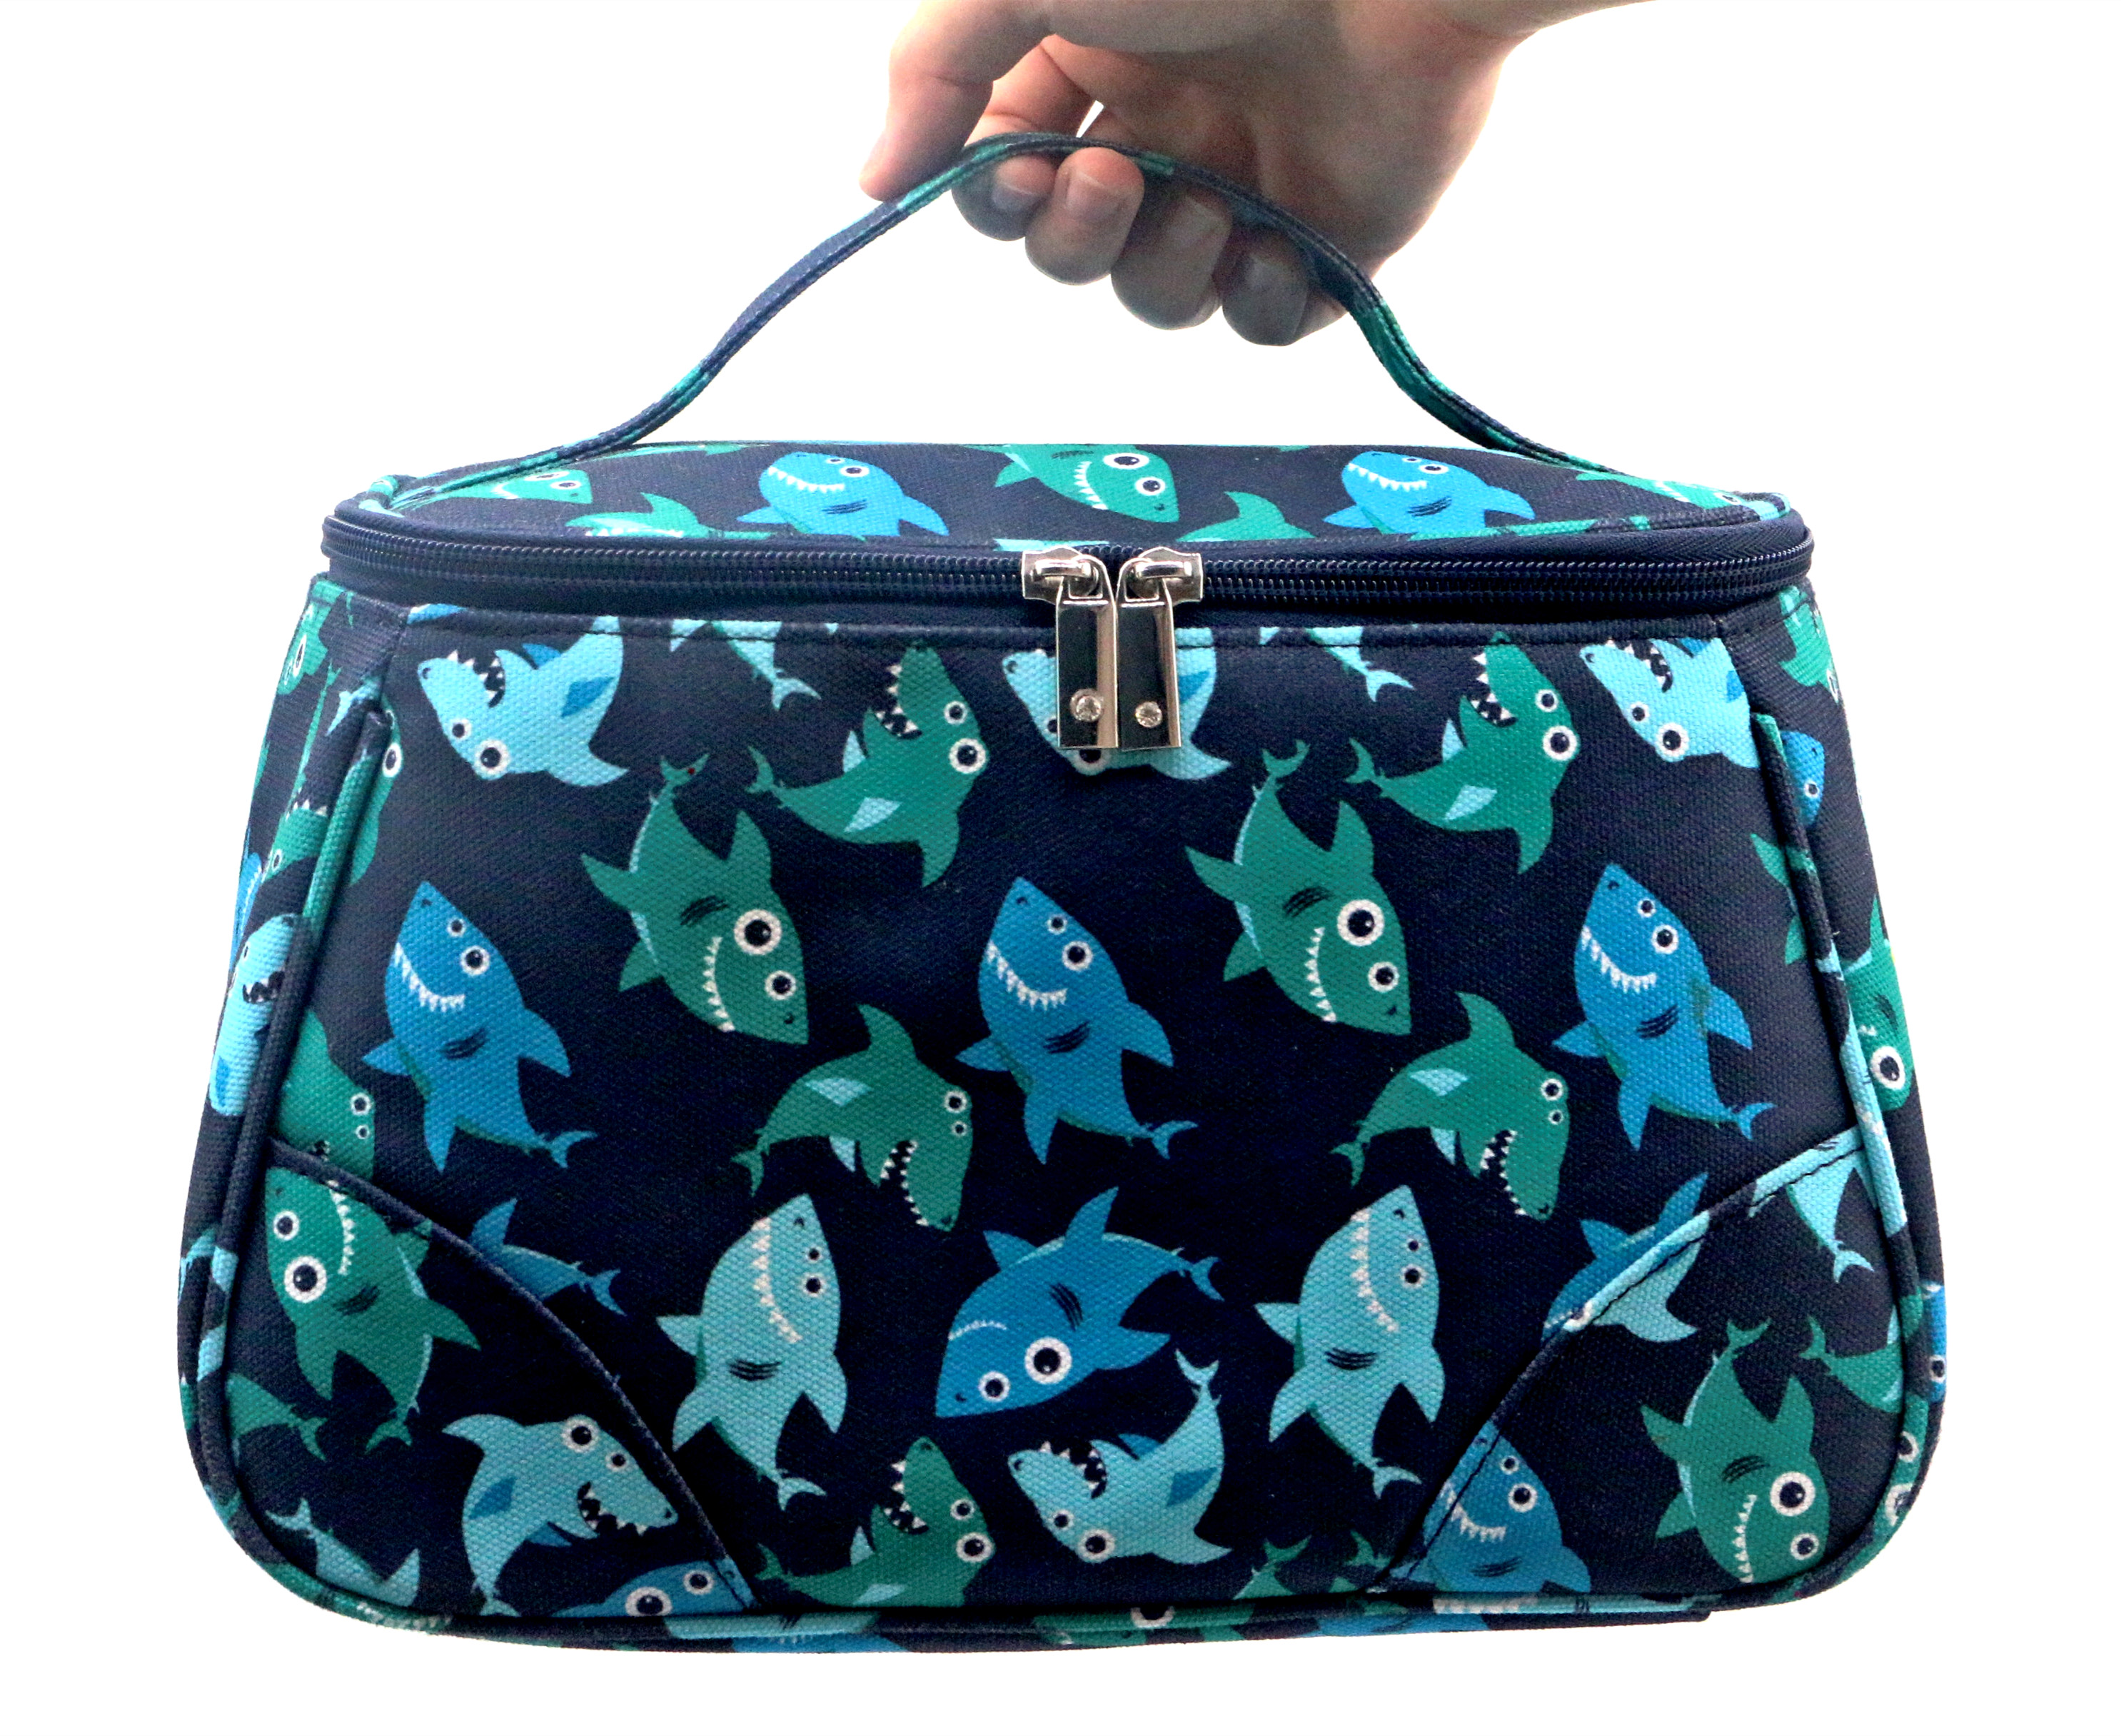 New Large Capacity Portable Handle Washable Travel Toiletry Bag Cute Animal Pattern Durable Polyester Canvas Cosmetic Makeup Bag